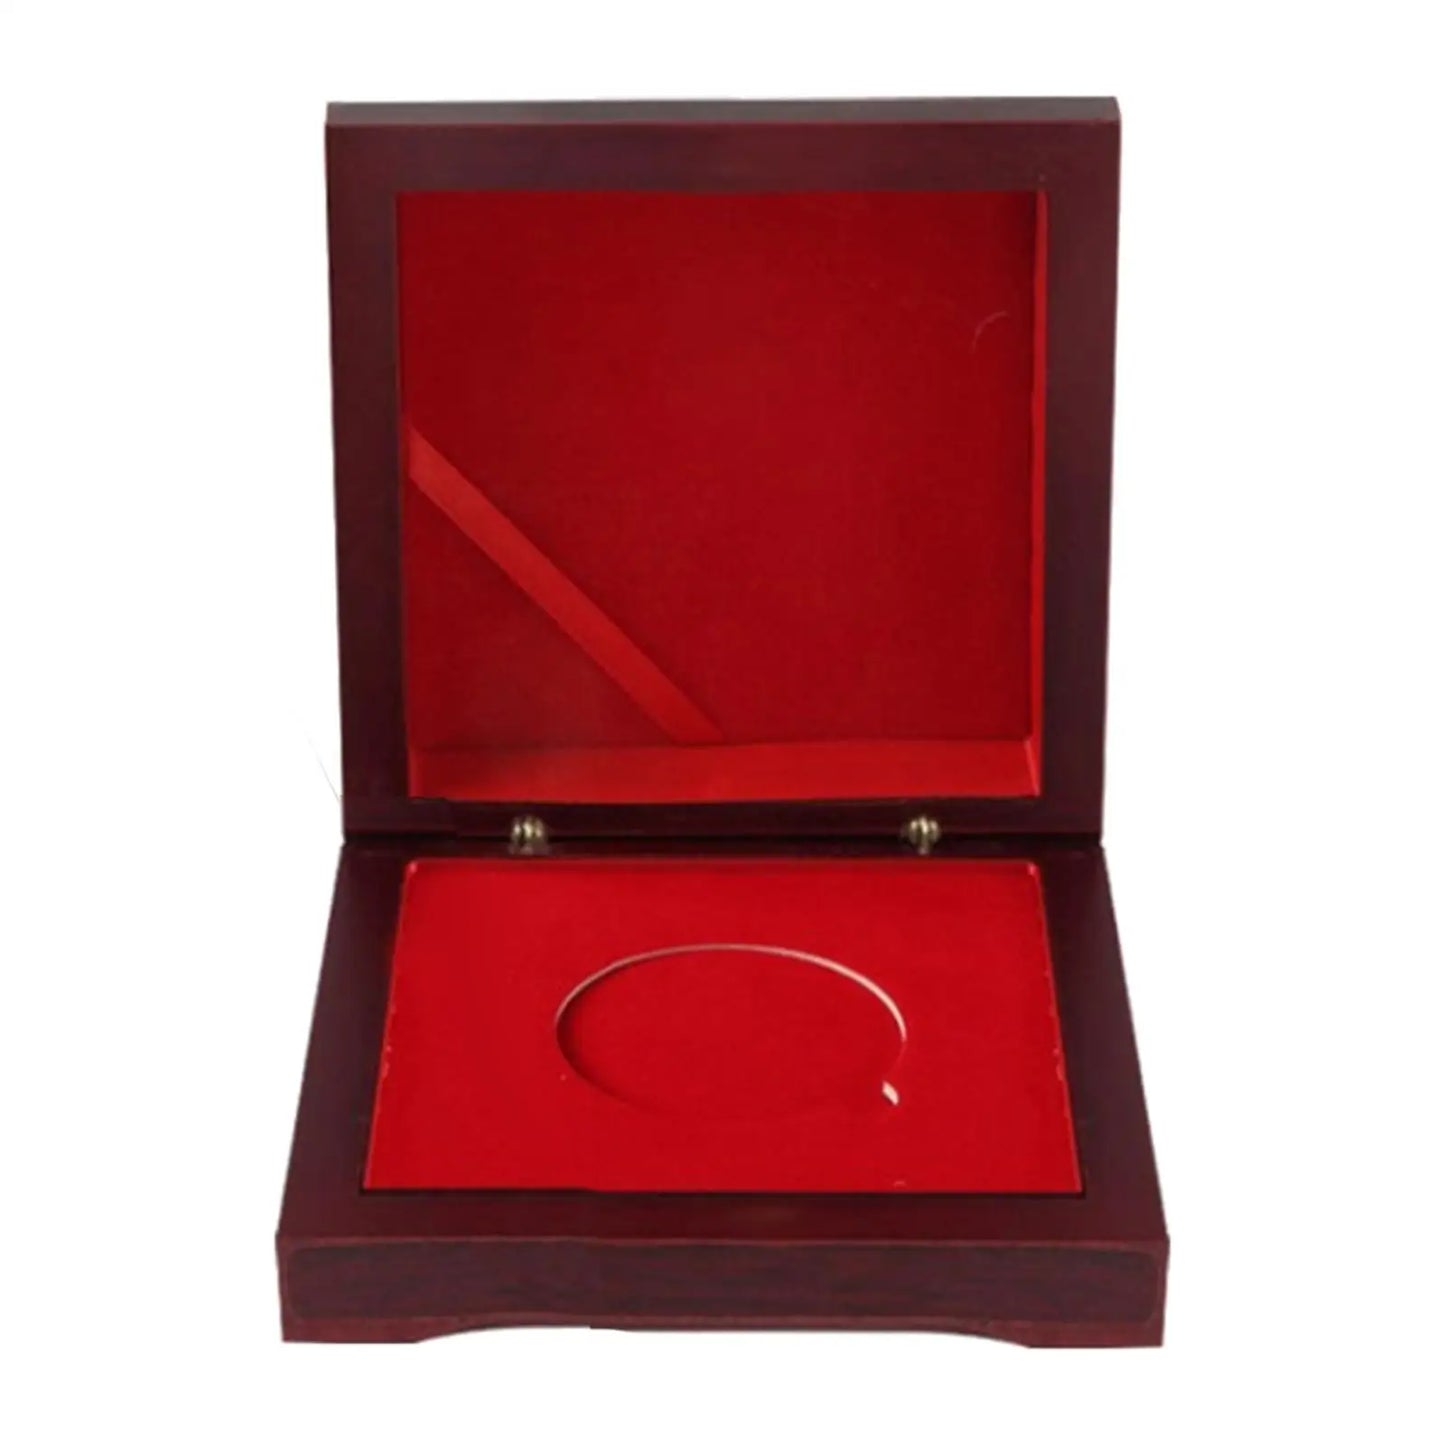 Best Seller: Wooden Coin Storage Box - Elegant Display for Commemorative Coins"